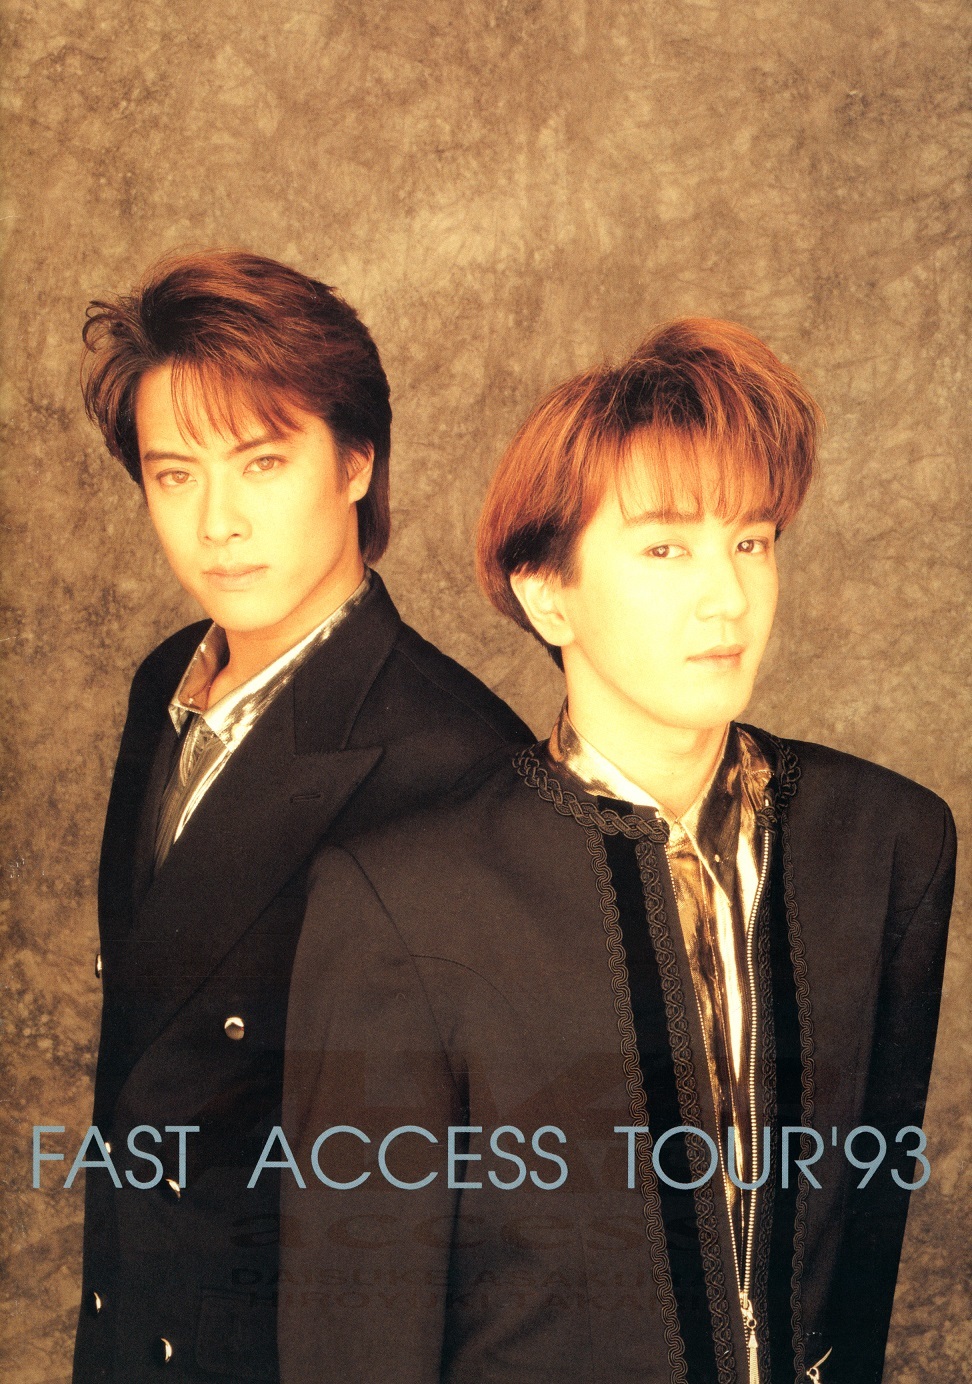 access 1st Tour「FAST ACCESS TOUR ‘93」ツアーパンフレット